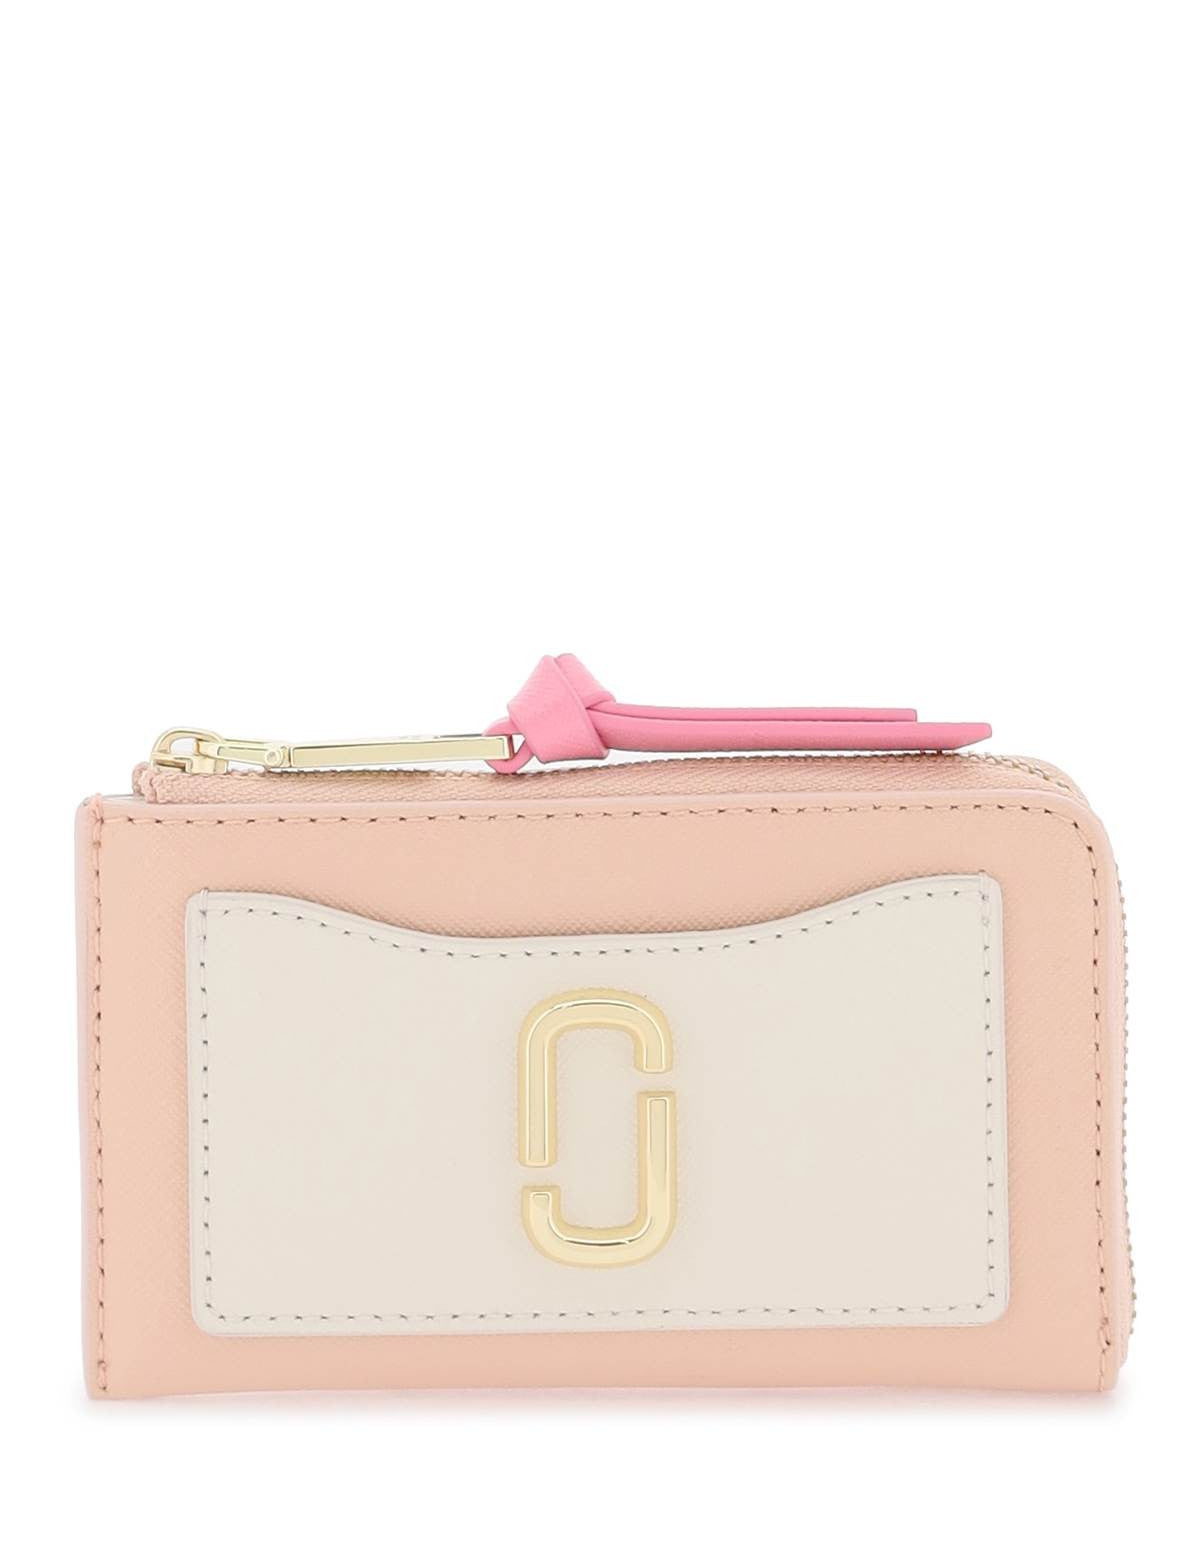 marc-jacobs-the-utility-snapshot-top-zip-multi-wallet_61a4a99f-37a0-4a70-821f-a62c0fd65070.jpg